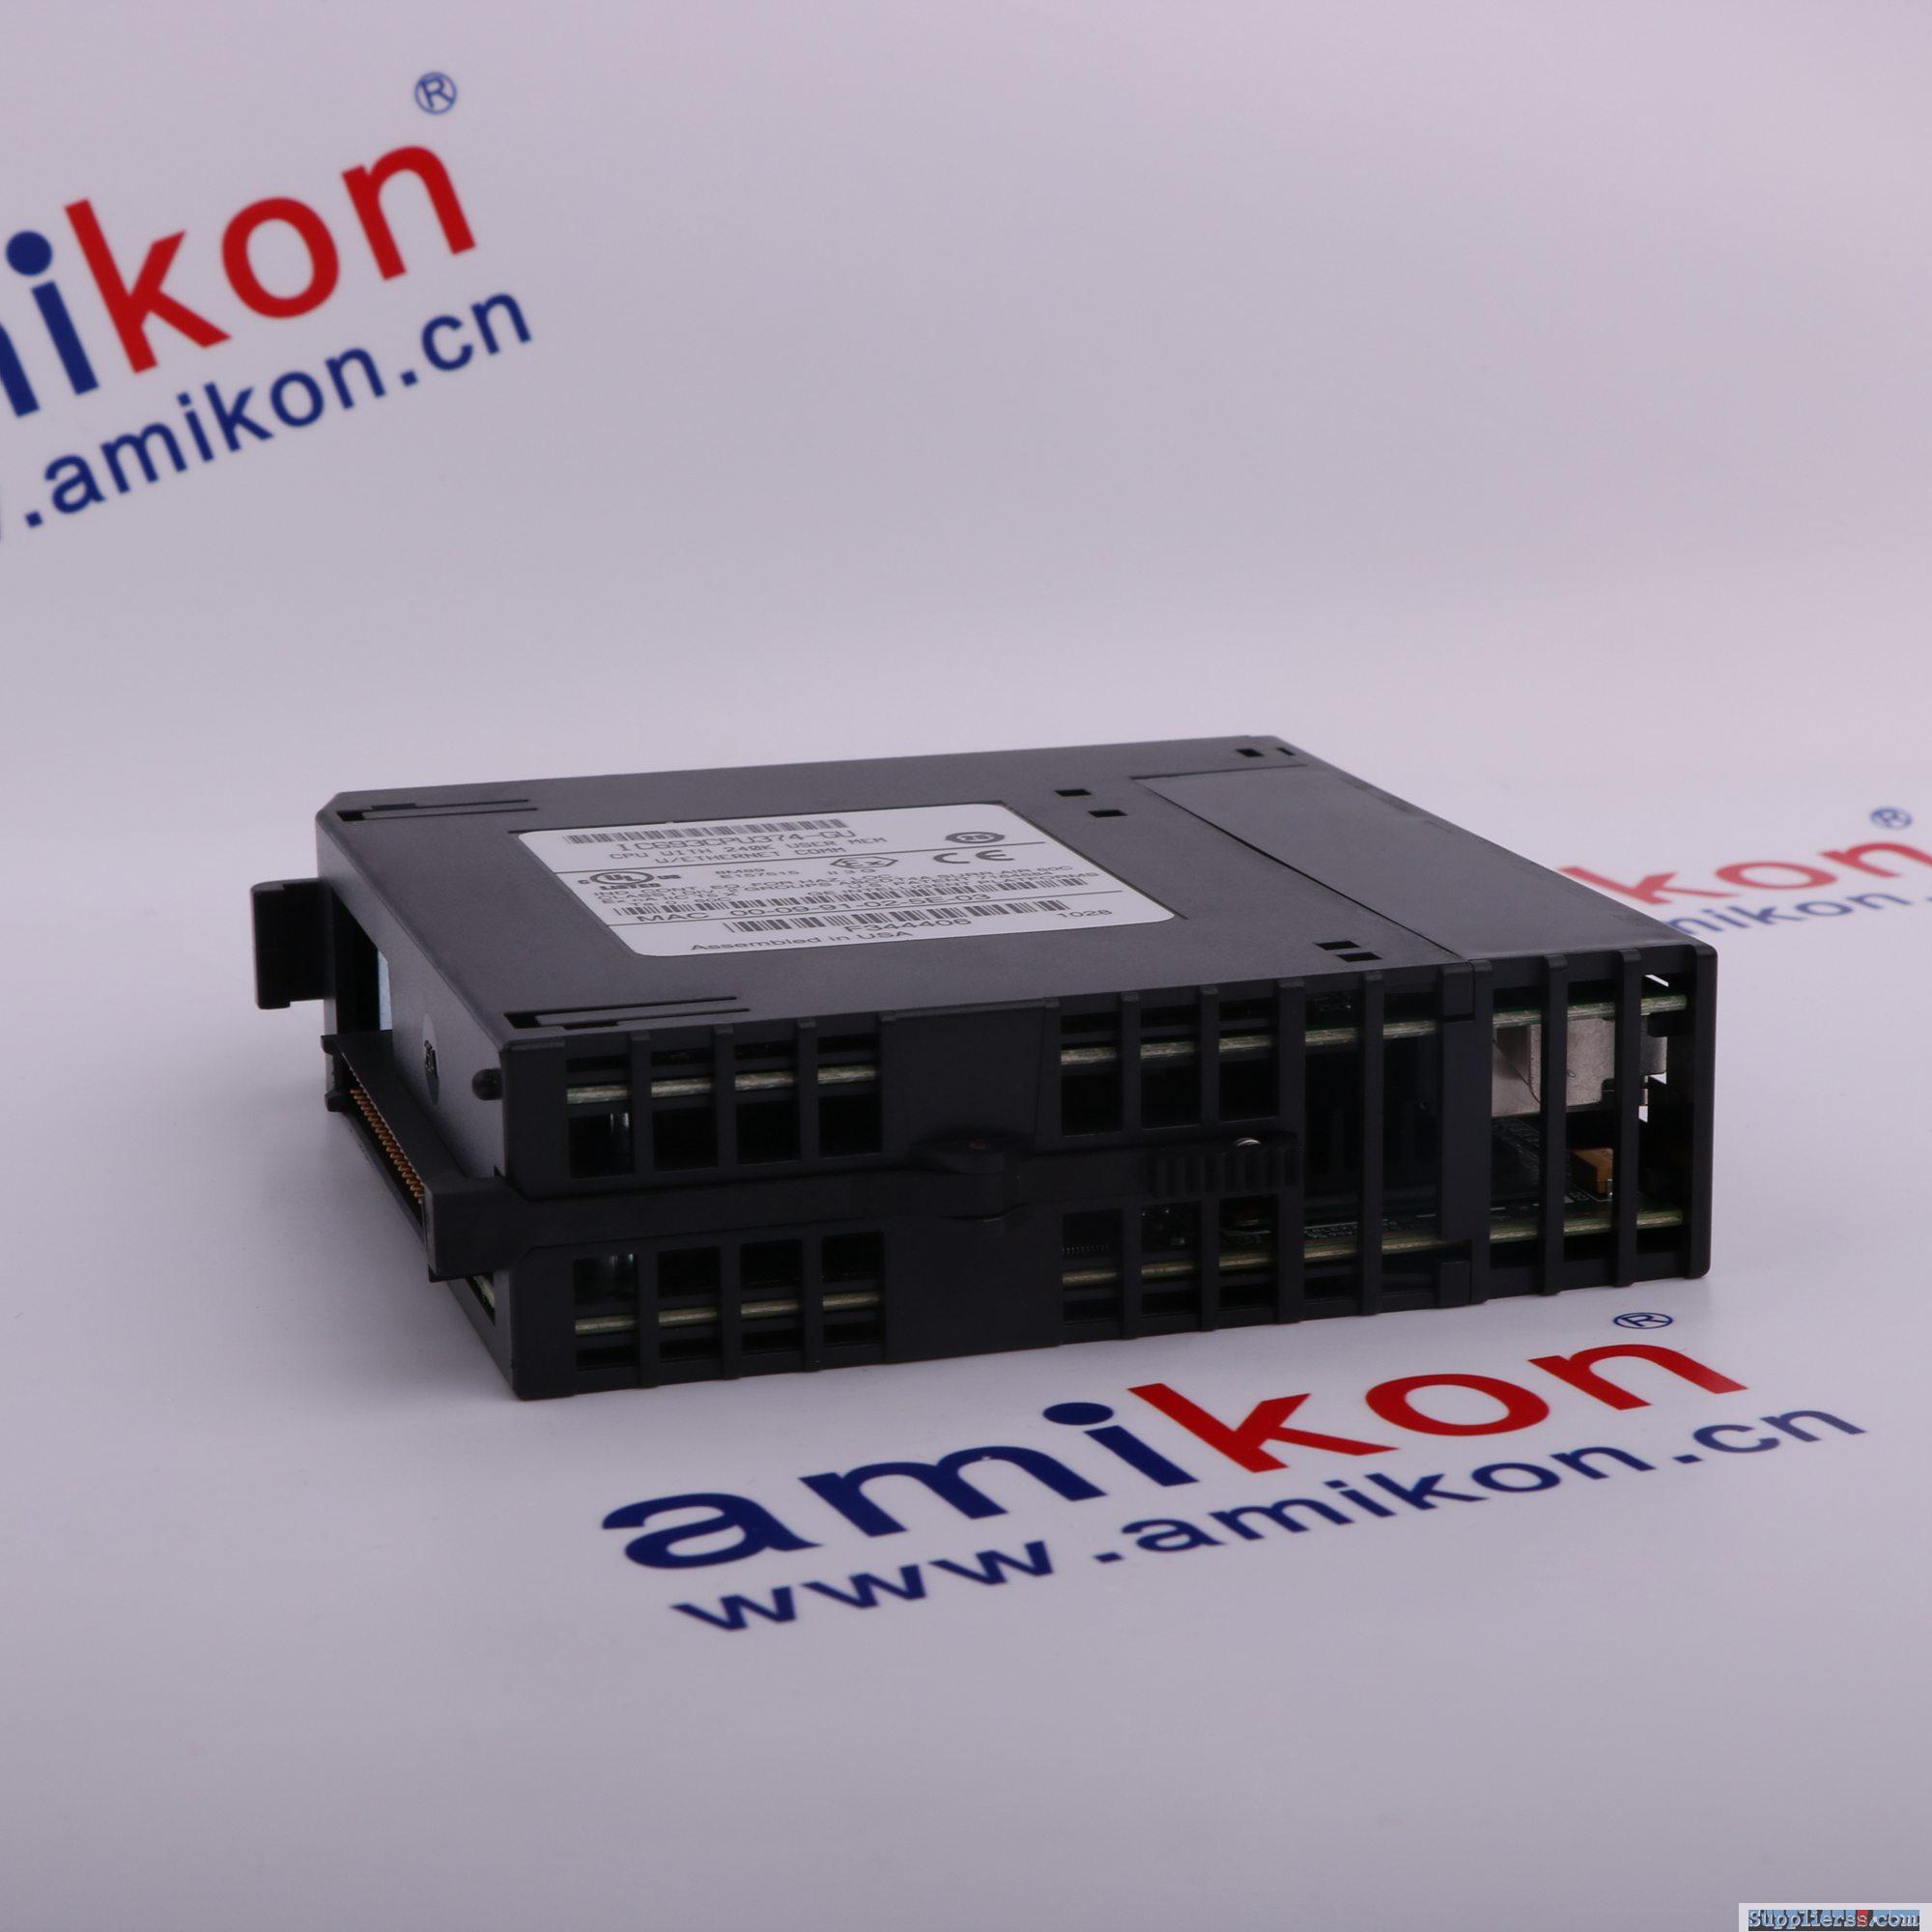 SELL WELL GE IC694PWR321CA PLS CONTACT:sales8@amikon.cn/+86 18030235313